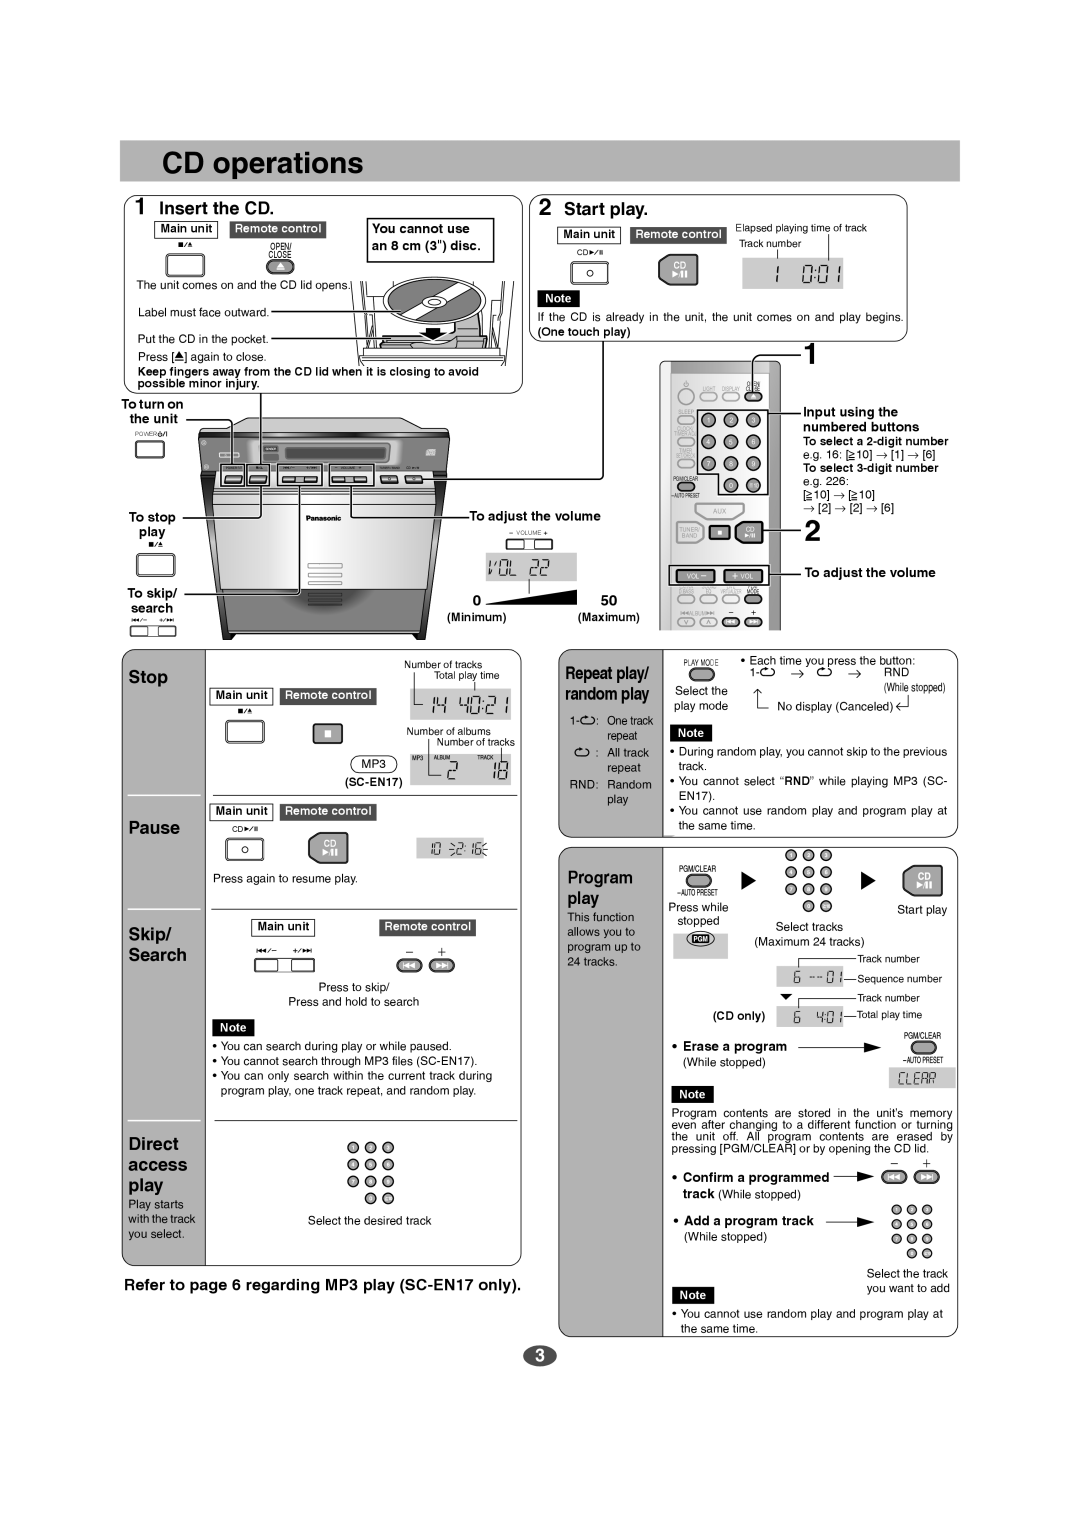 Panasonic SC-EN15 manual Insert the CD, Start play, Stop Pause Skip Search, Refer to page 6 regarding MP3 play SC-EN17only 